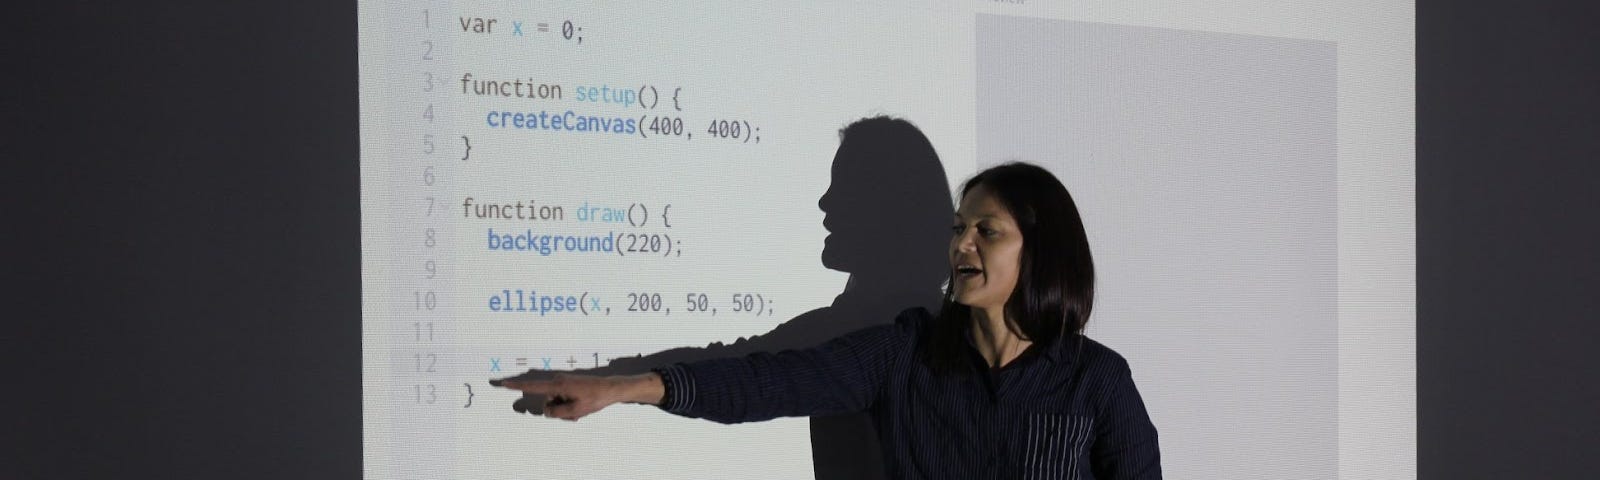 Asian-American woman with long dark hair stands in front of a projection of p5.js editor.